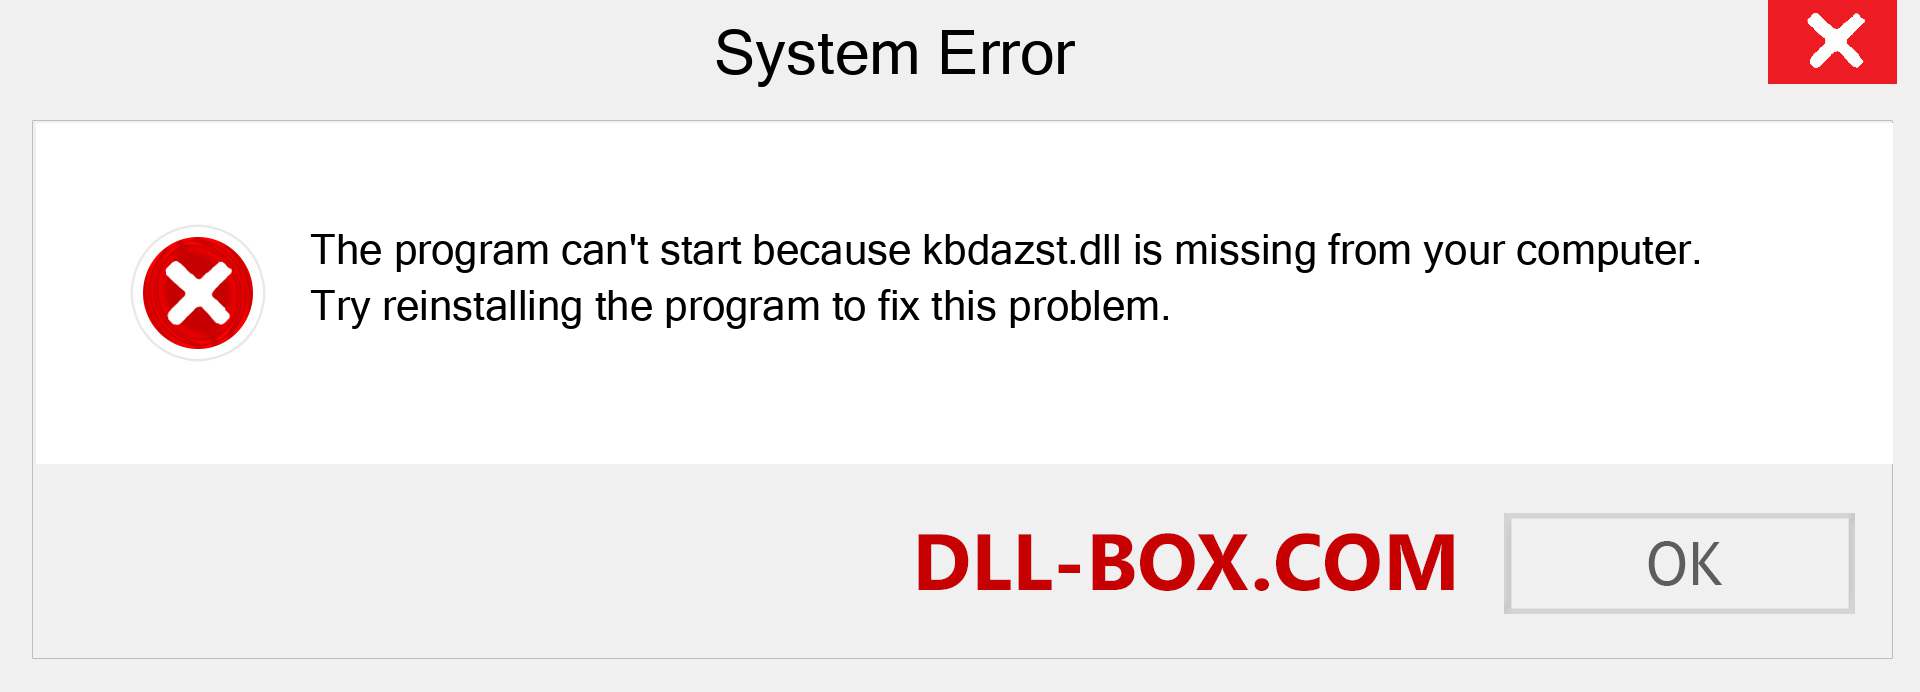  kbdazst.dll file is missing?. Download for Windows 7, 8, 10 - Fix  kbdazst dll Missing Error on Windows, photos, images